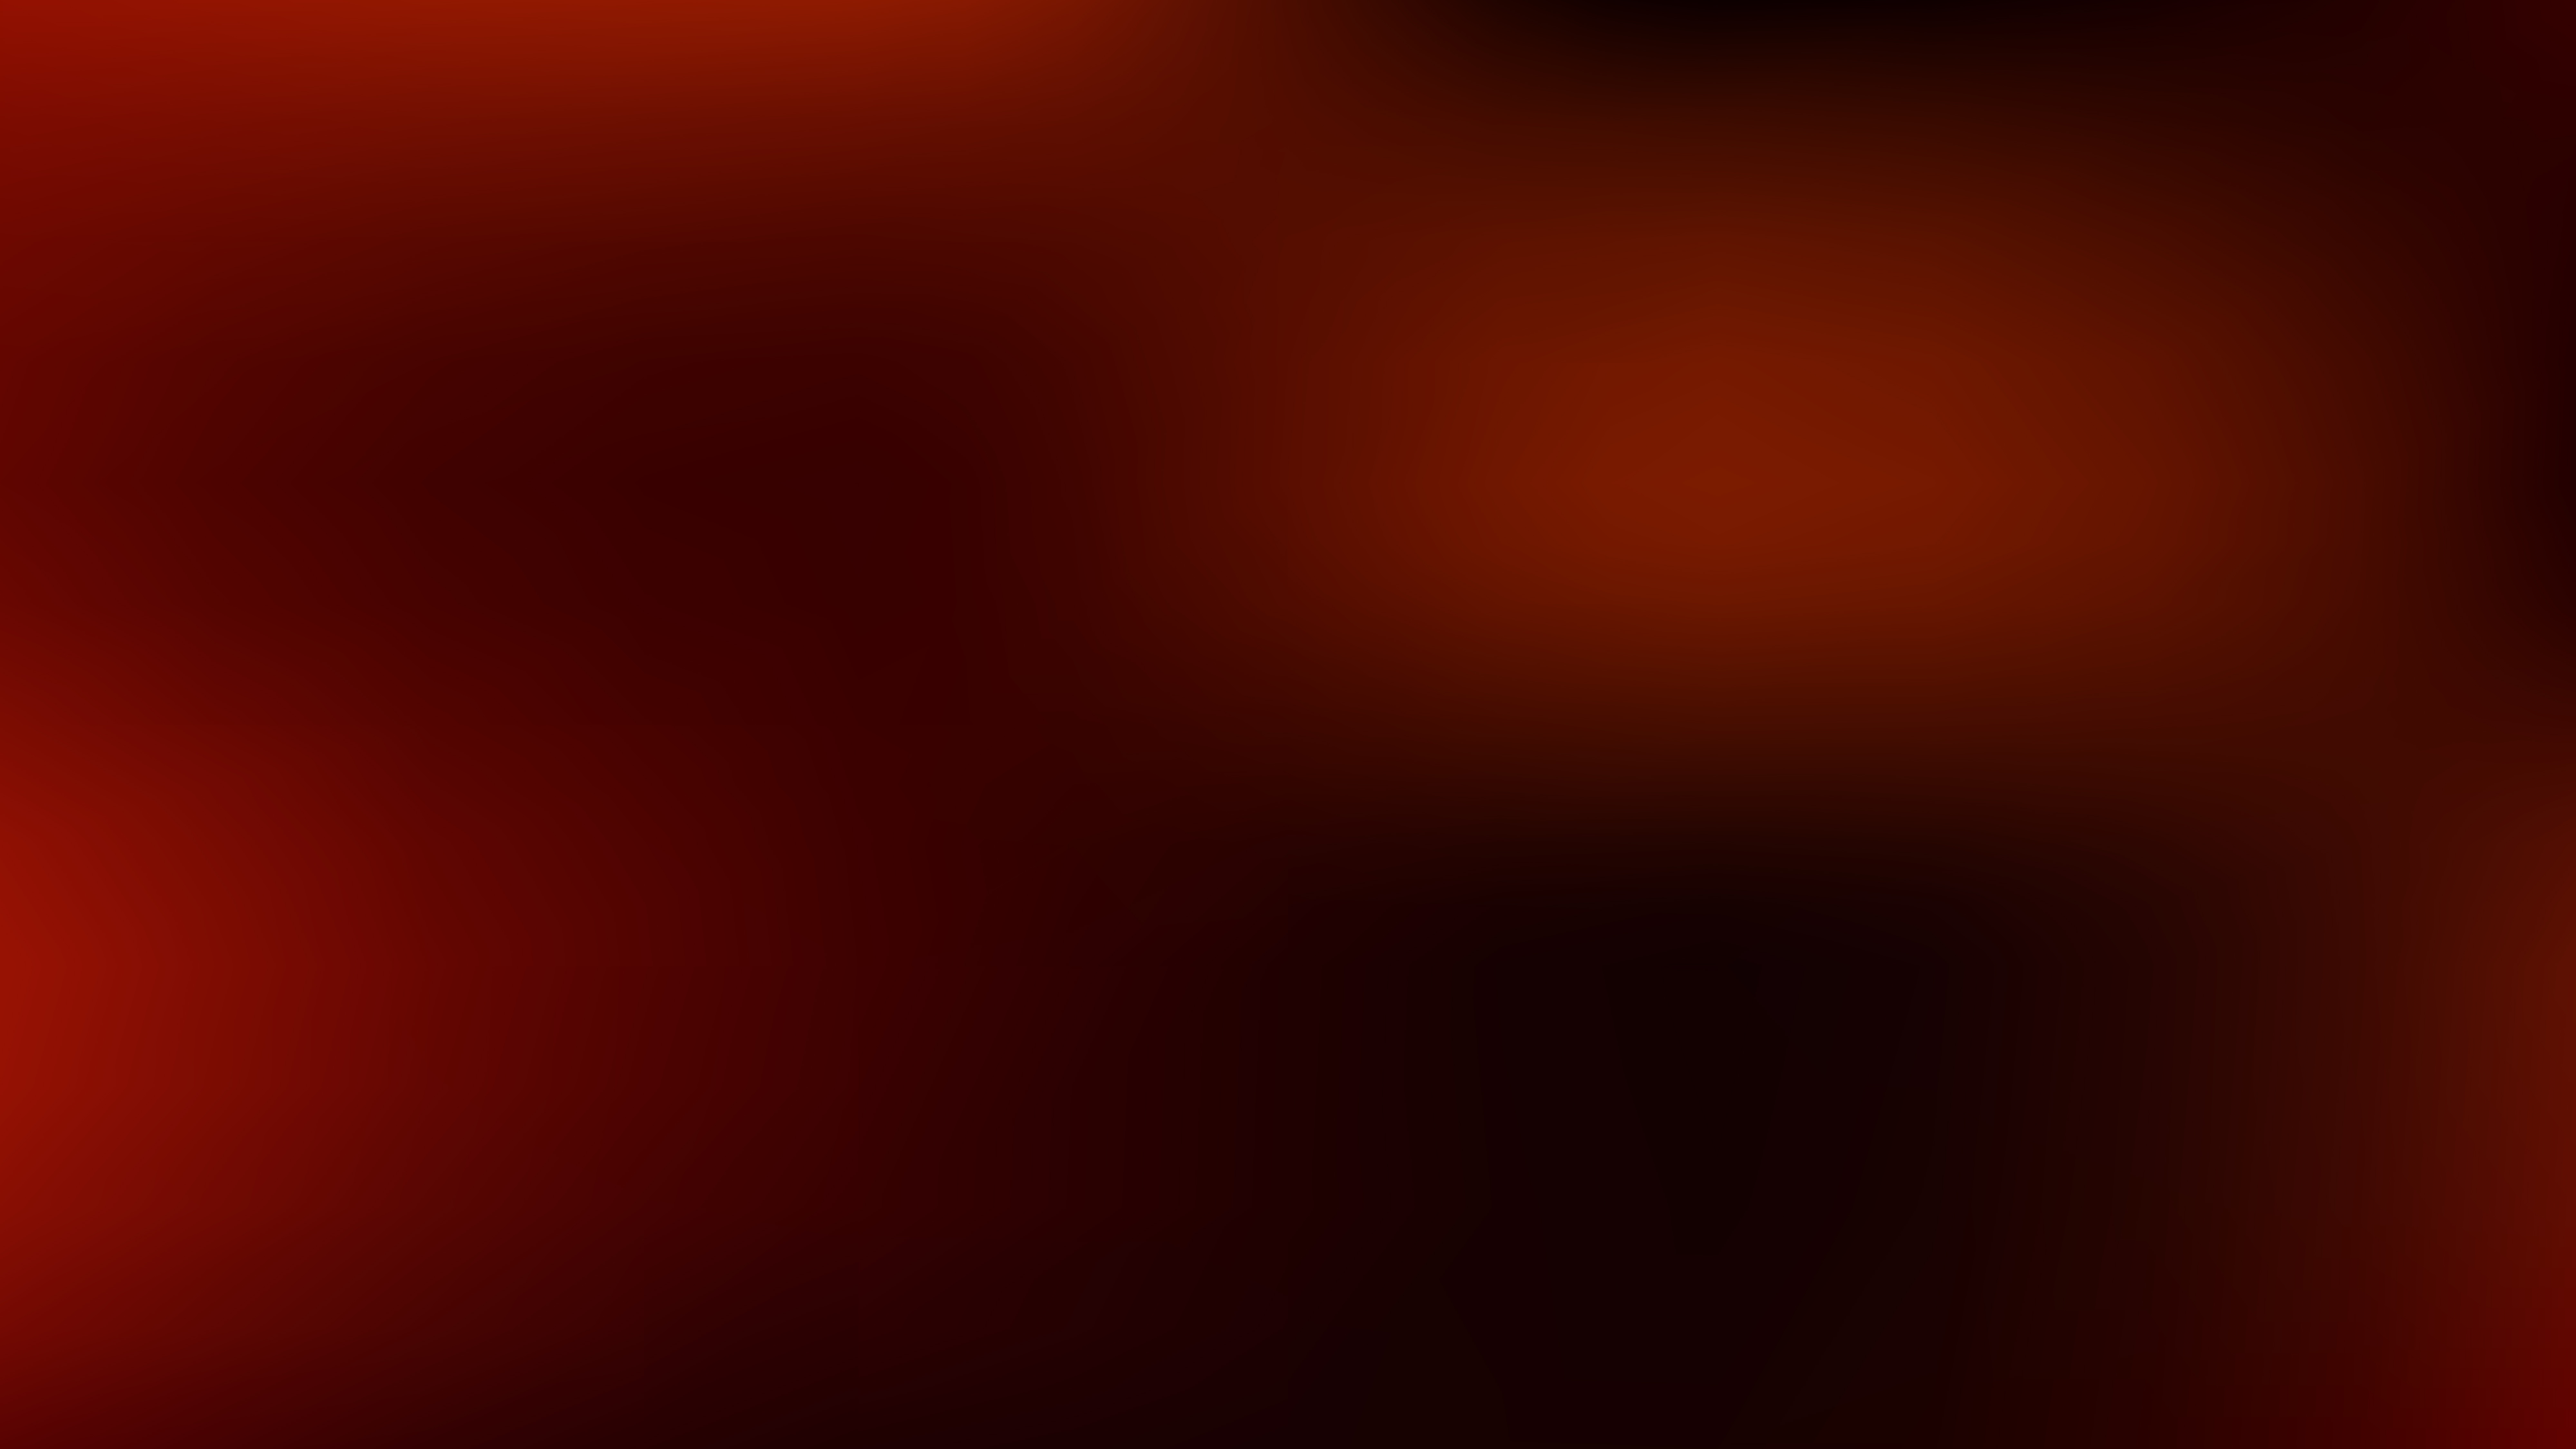 Red And Black Blur Photo Wallpaper Design - Red And Black Blur Background - HD Wallpaper 